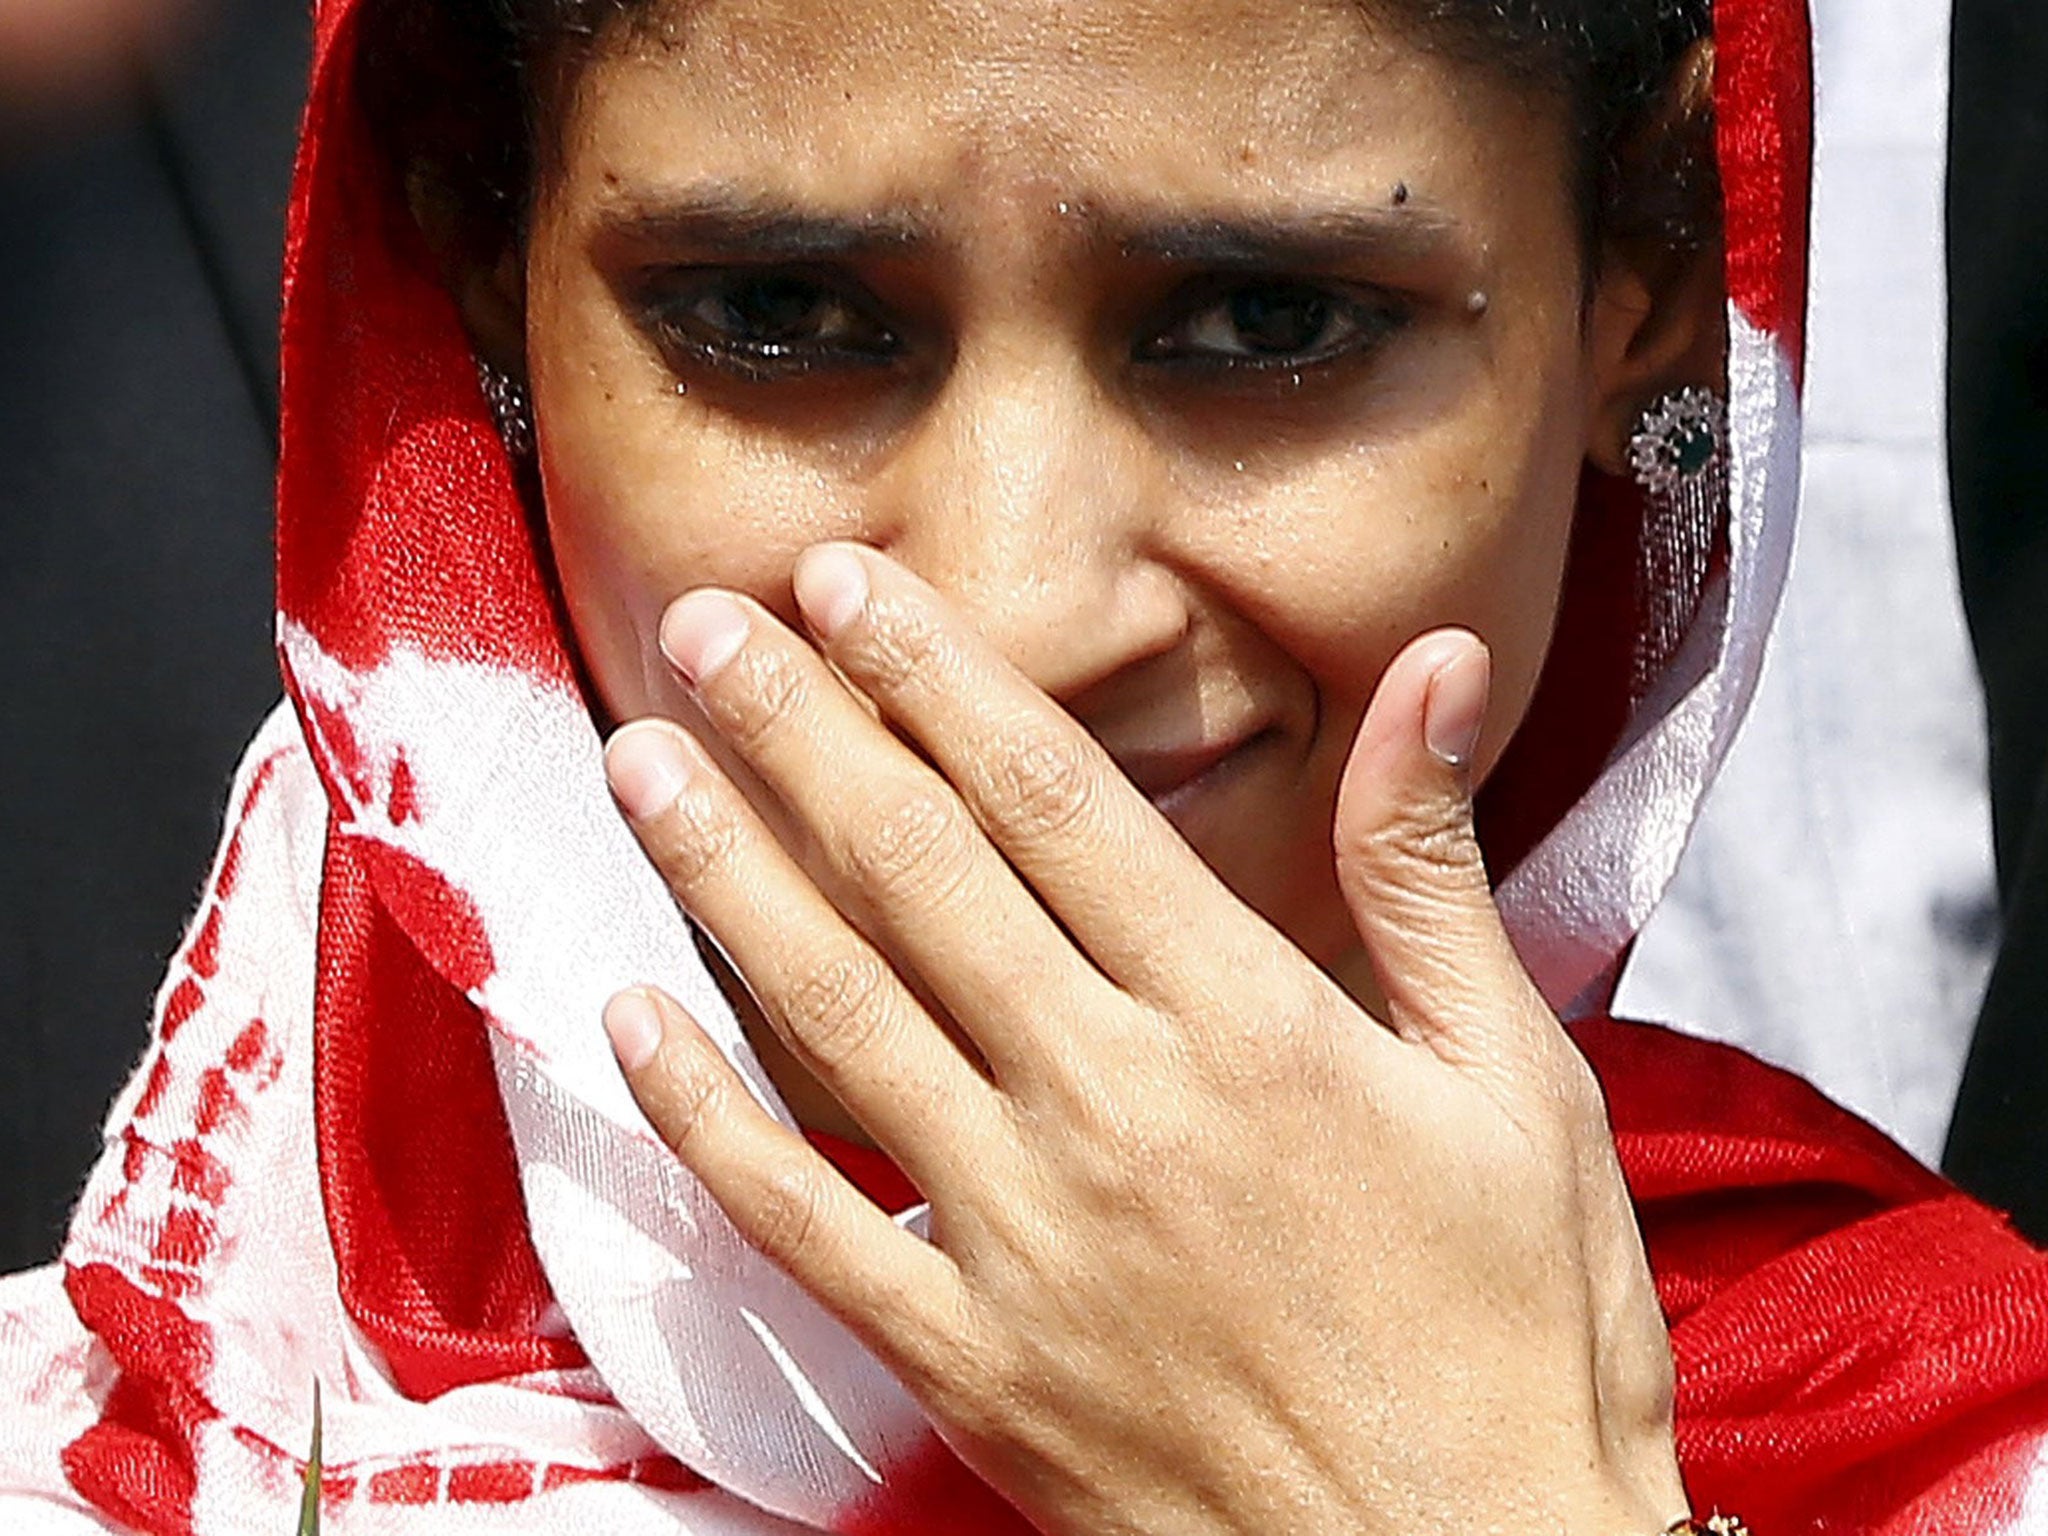 Geeta gestures as she comes out from an airport after her arrival in New Delhi, India, October 26, 2015